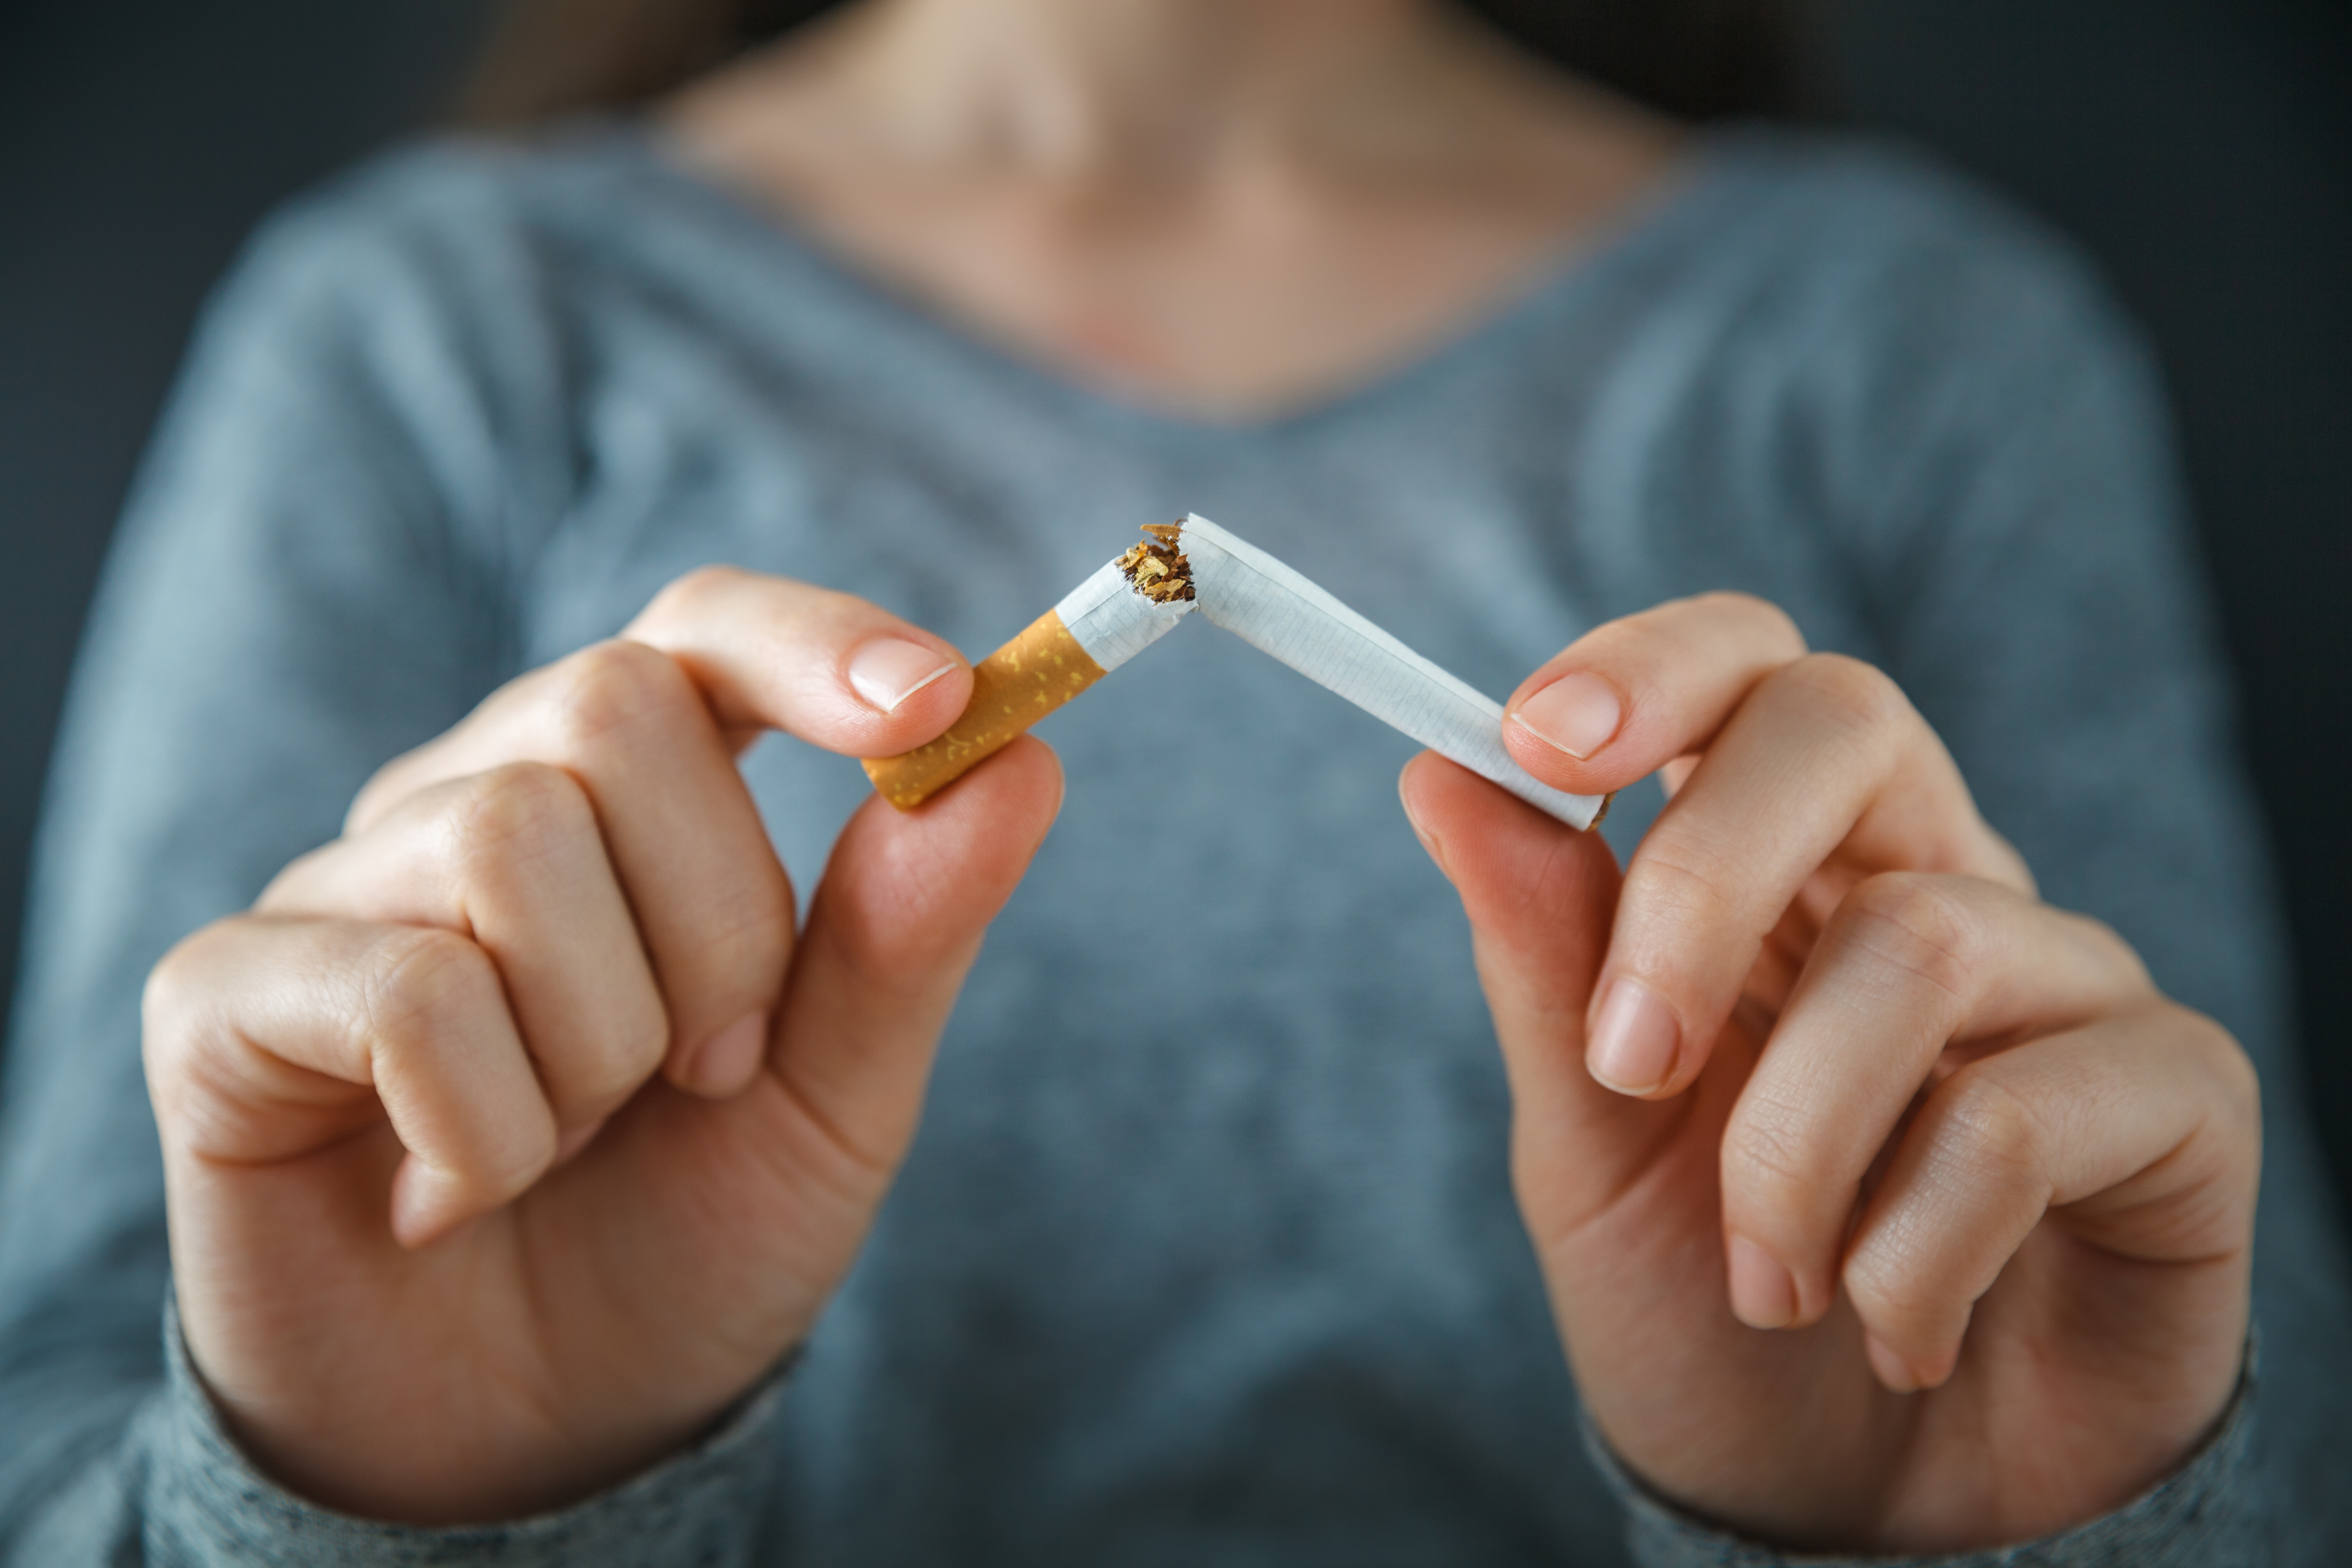 Stop using tobacco with hypnosis - Article - The United States Army